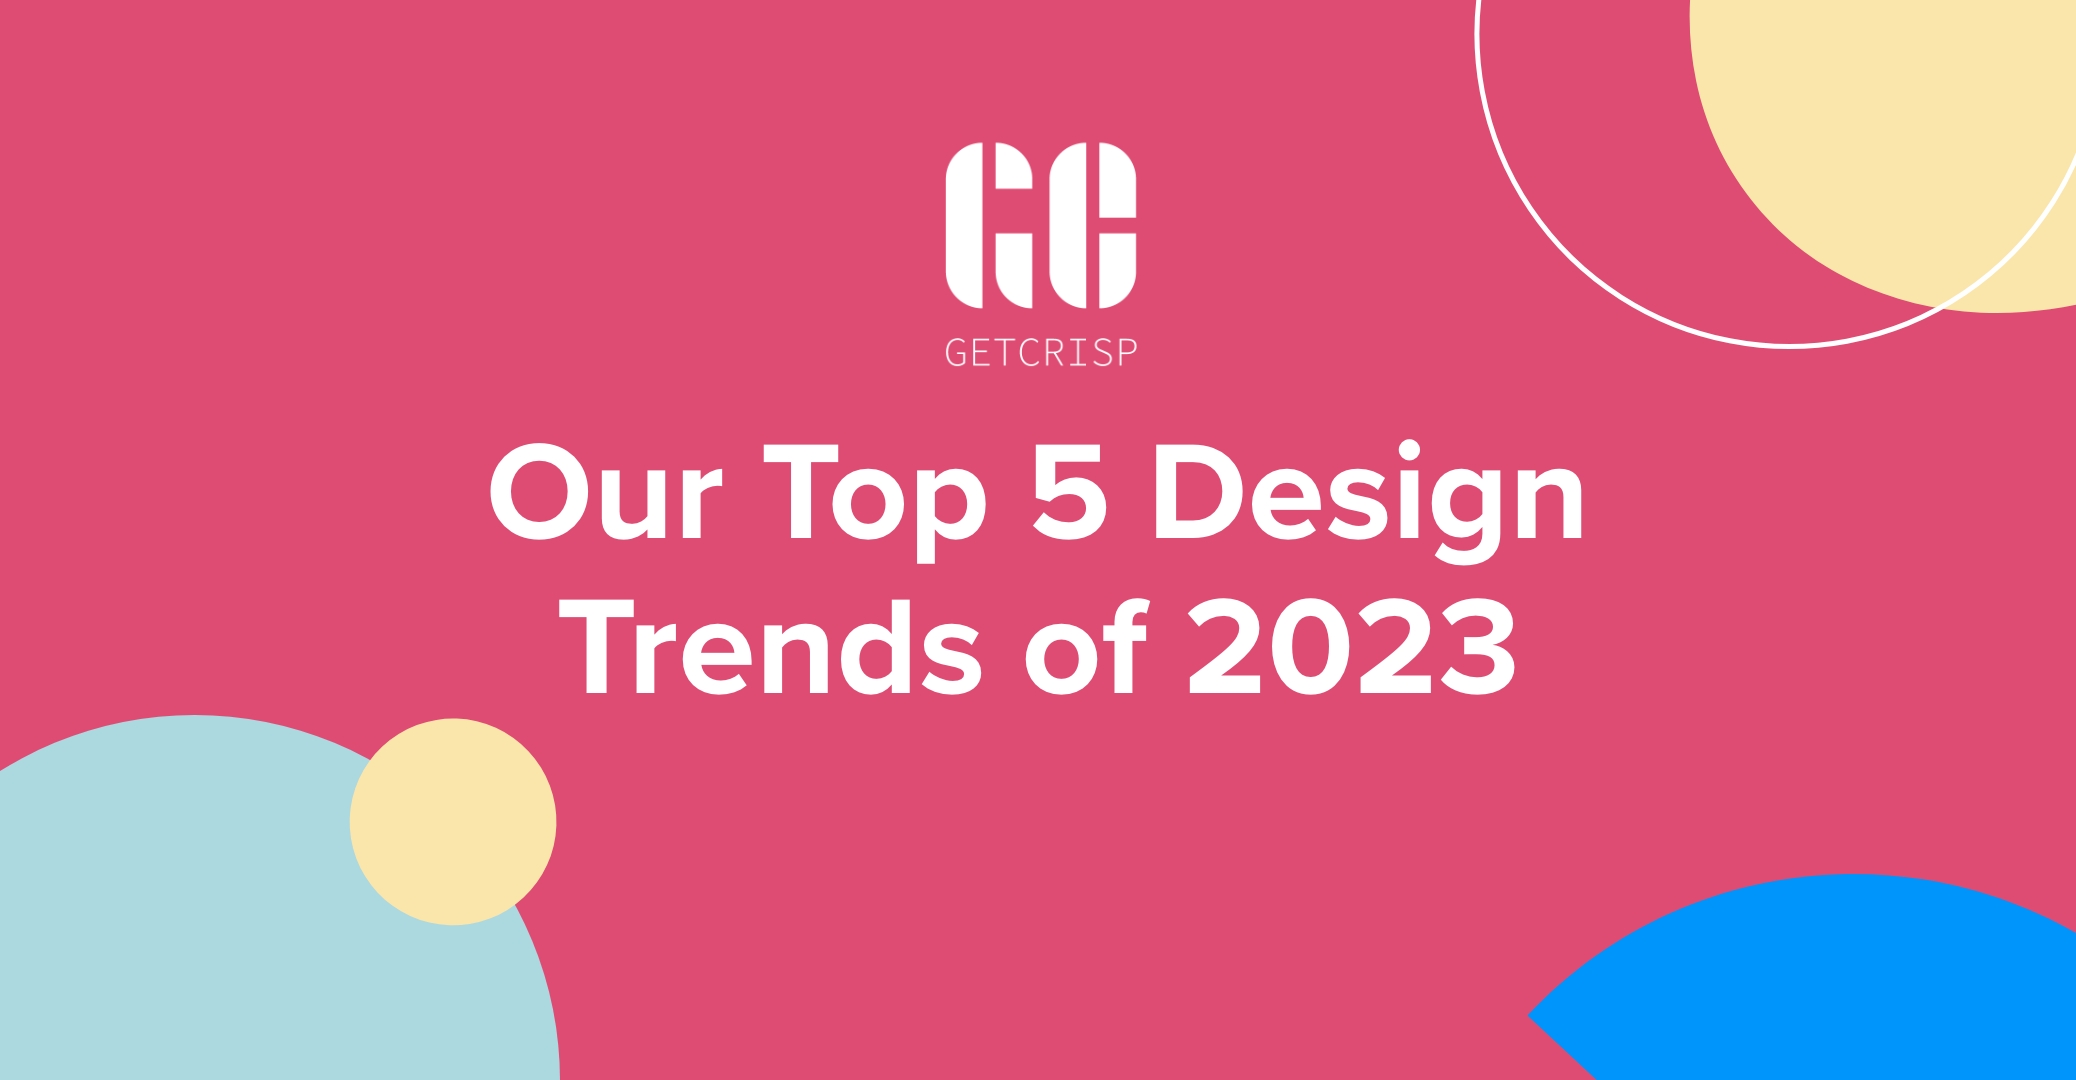 Our Top 5 Design Trends of 2023